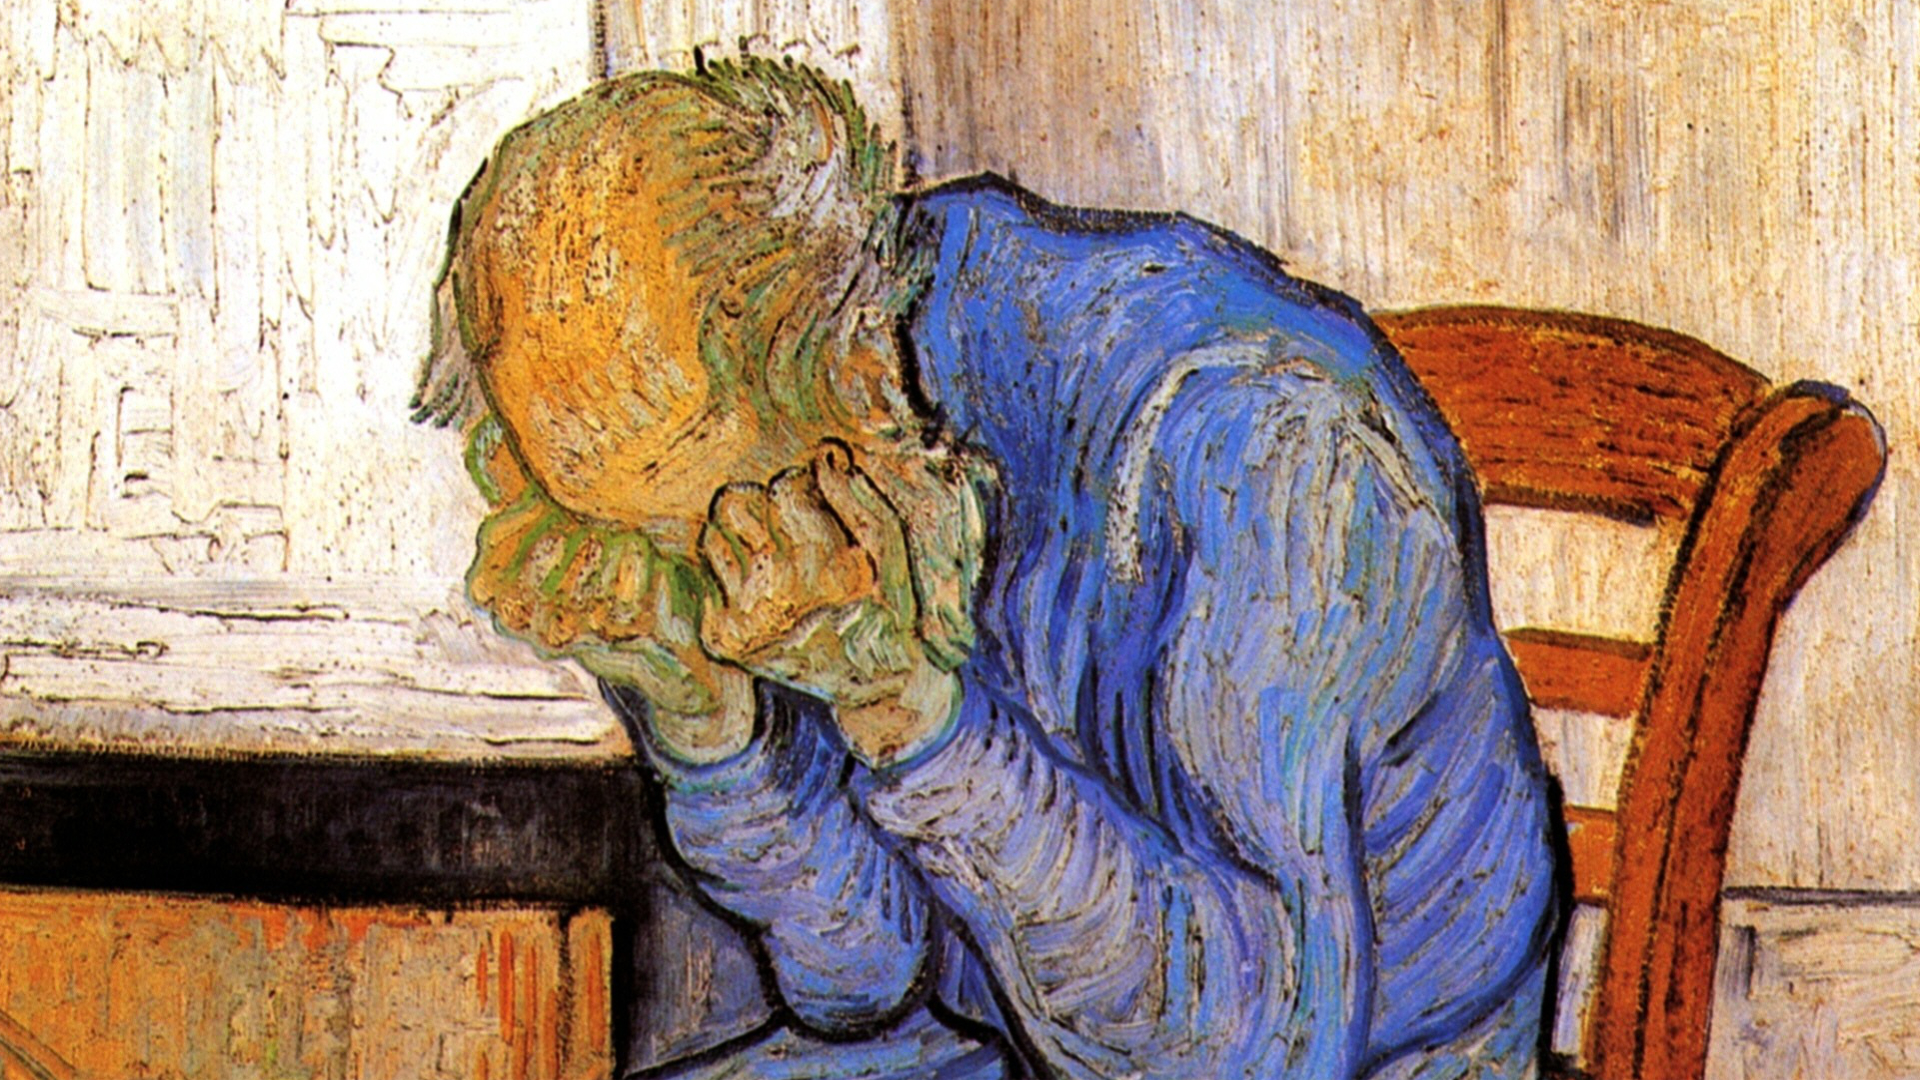 A detail of Van Gogh’s oil painting “Old Man In Sorrow” depicts an old man dressed in all blue sitting bent over in his chair, burying his face in his hands.